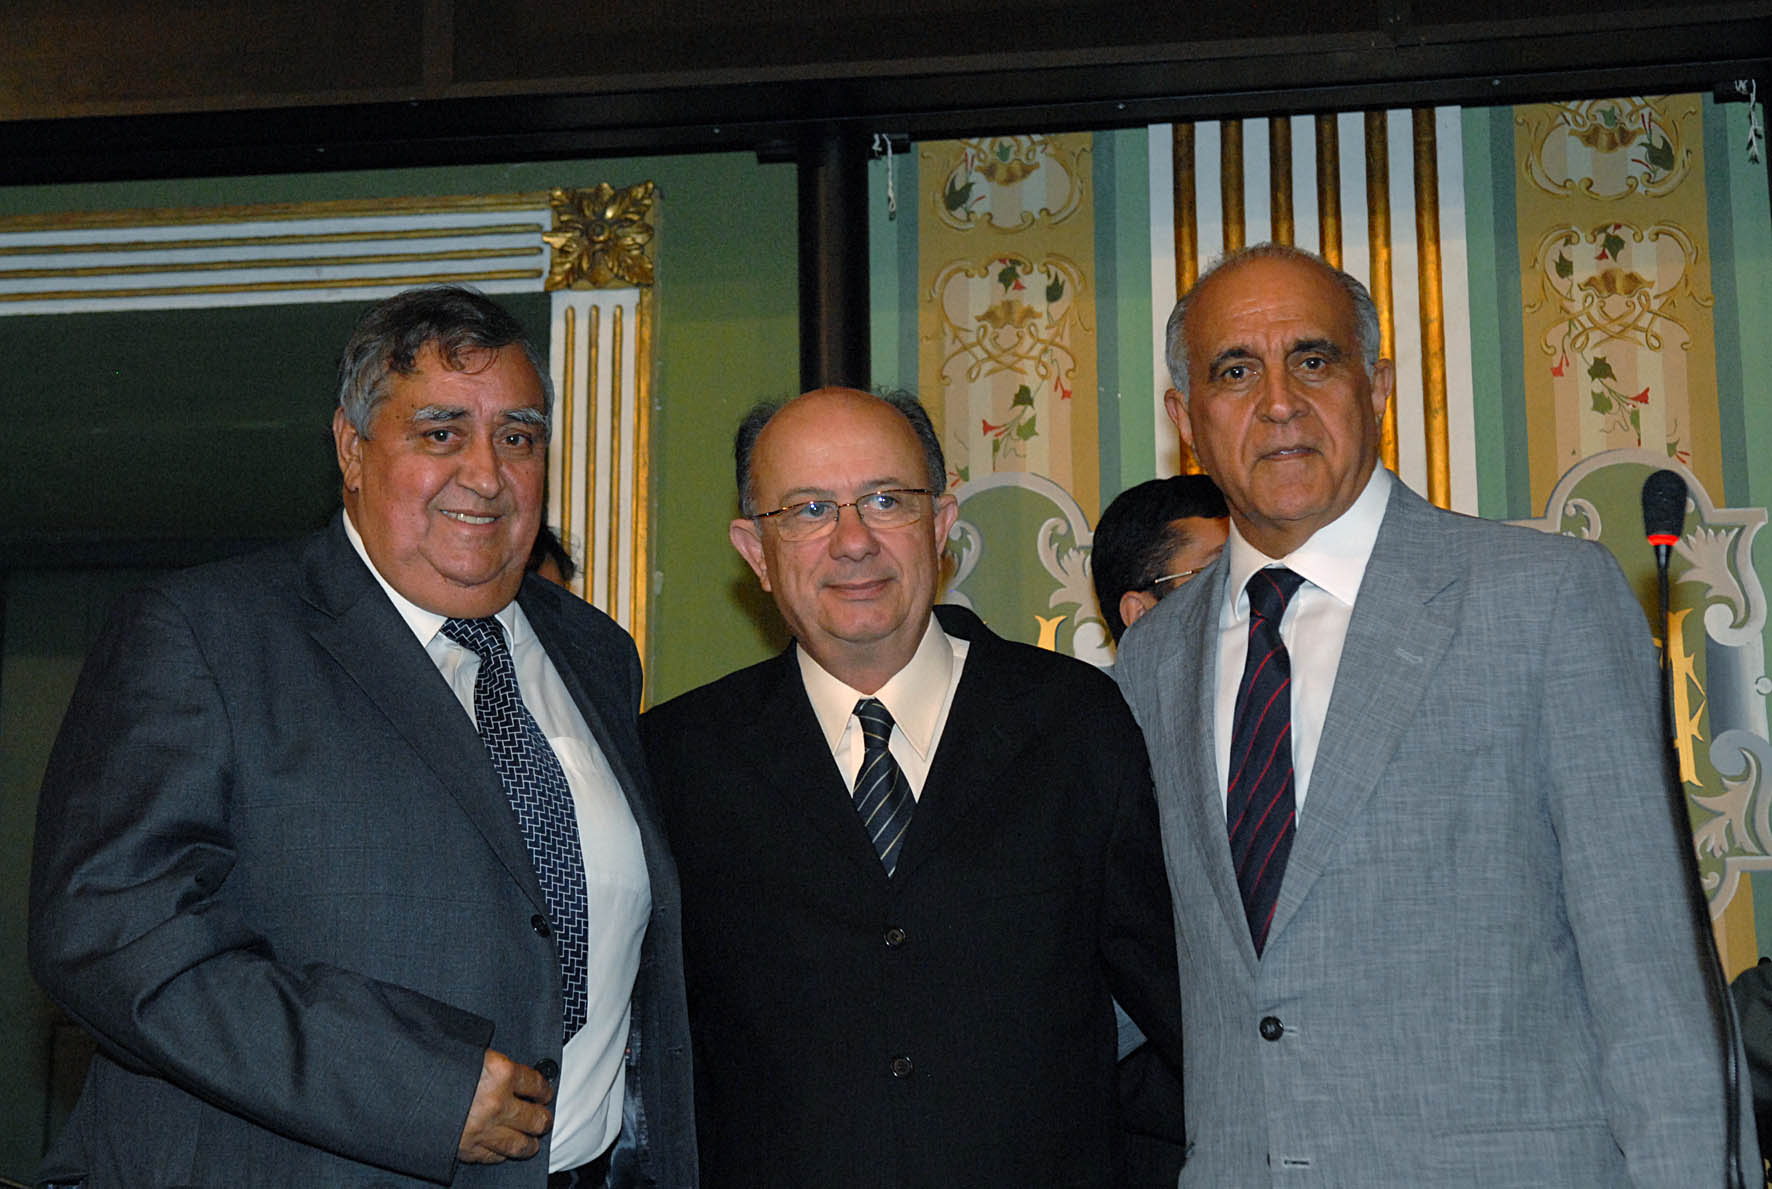 three gentlemen are smiling in suits and ties